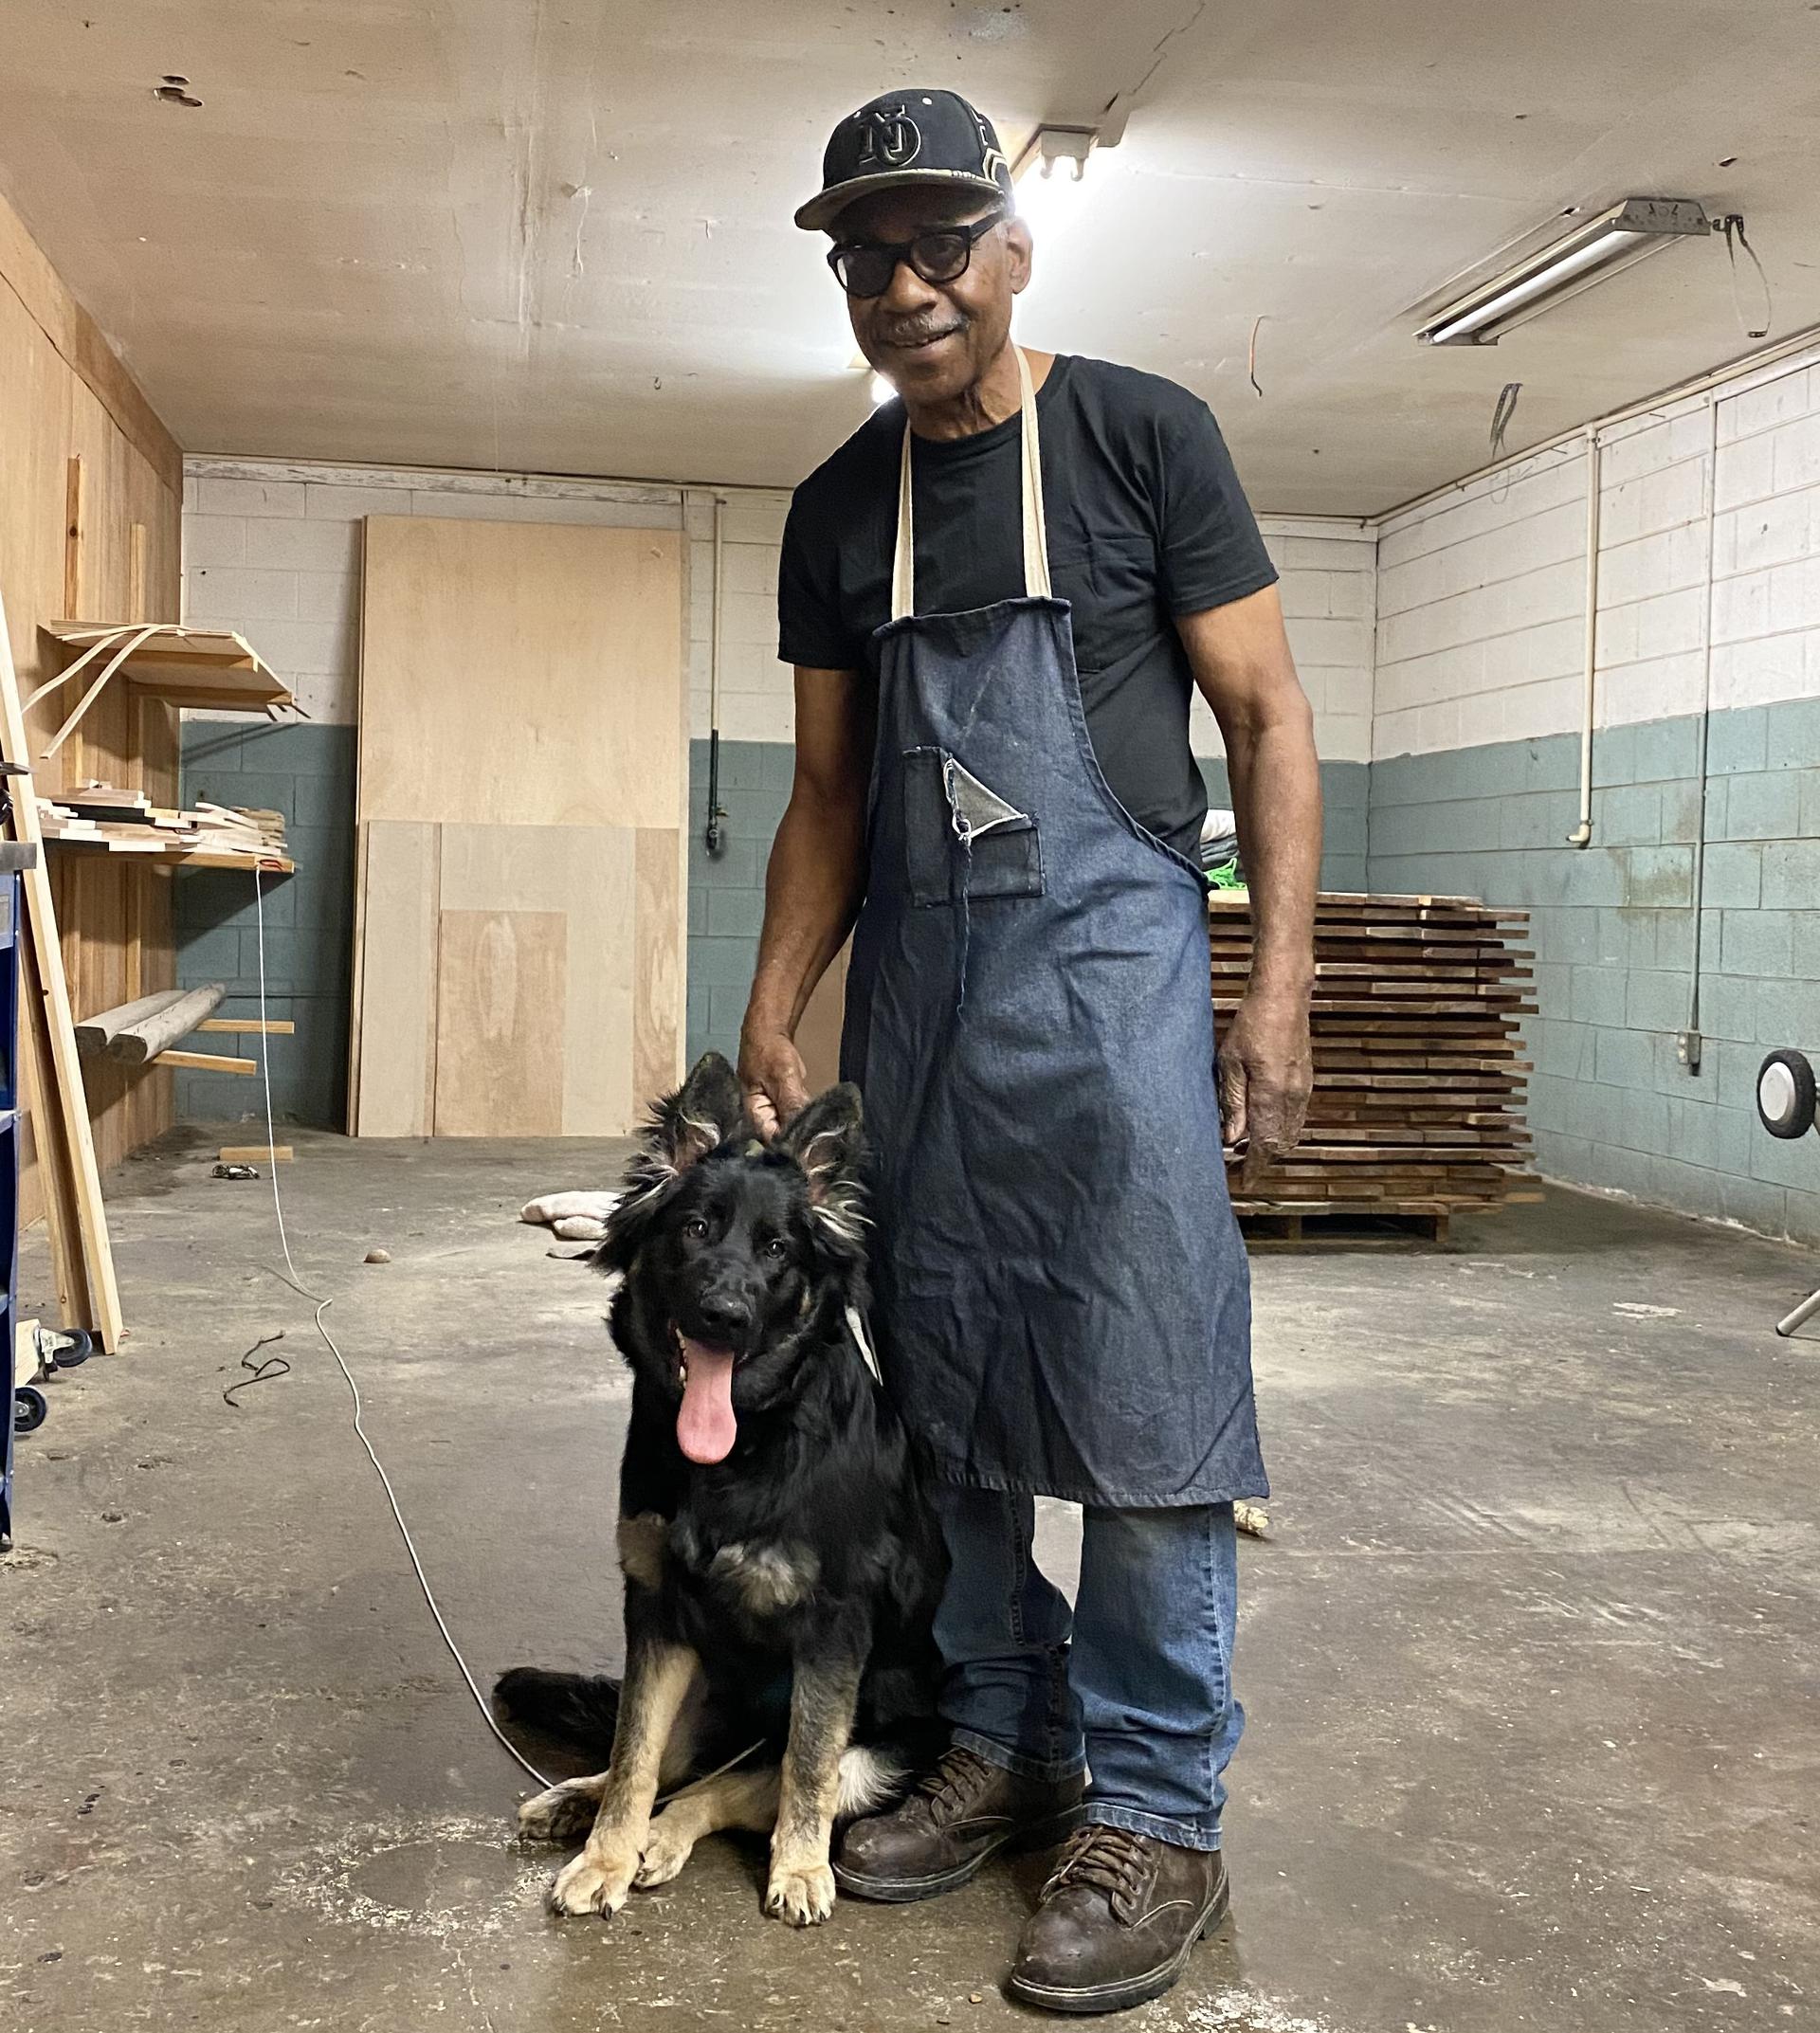 Theortric “Bojack” Givens with his dog, Termite